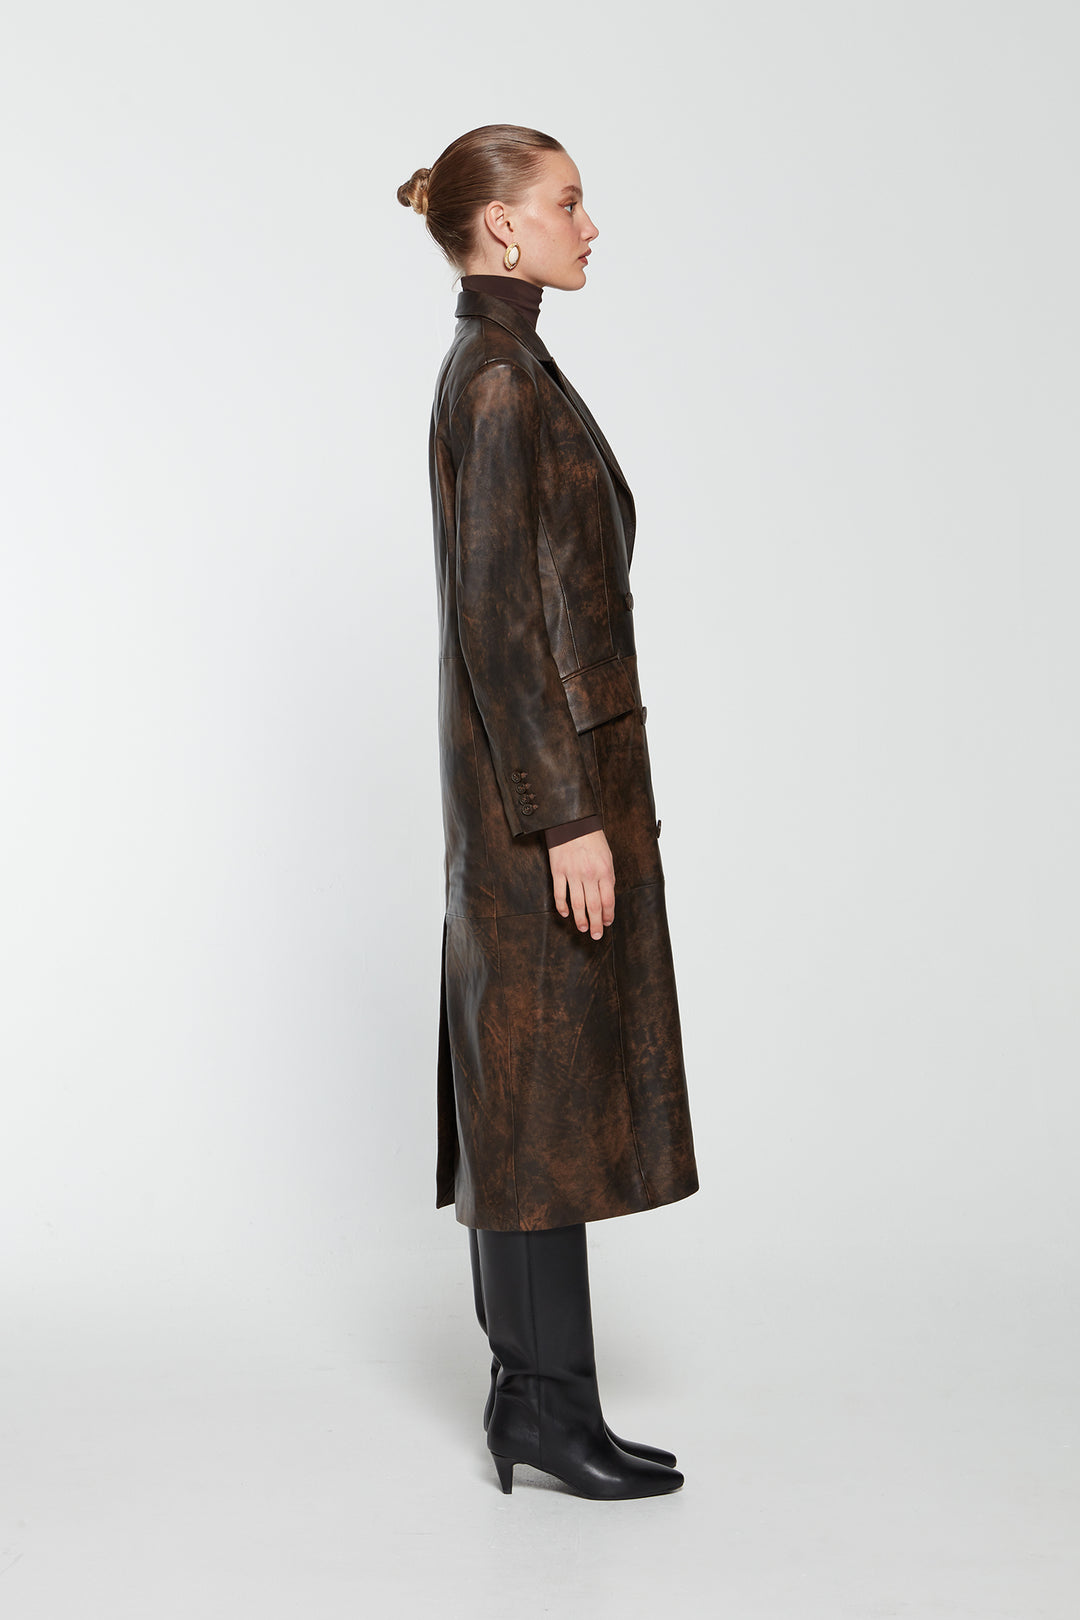 Aggie Distressed Leather Coat